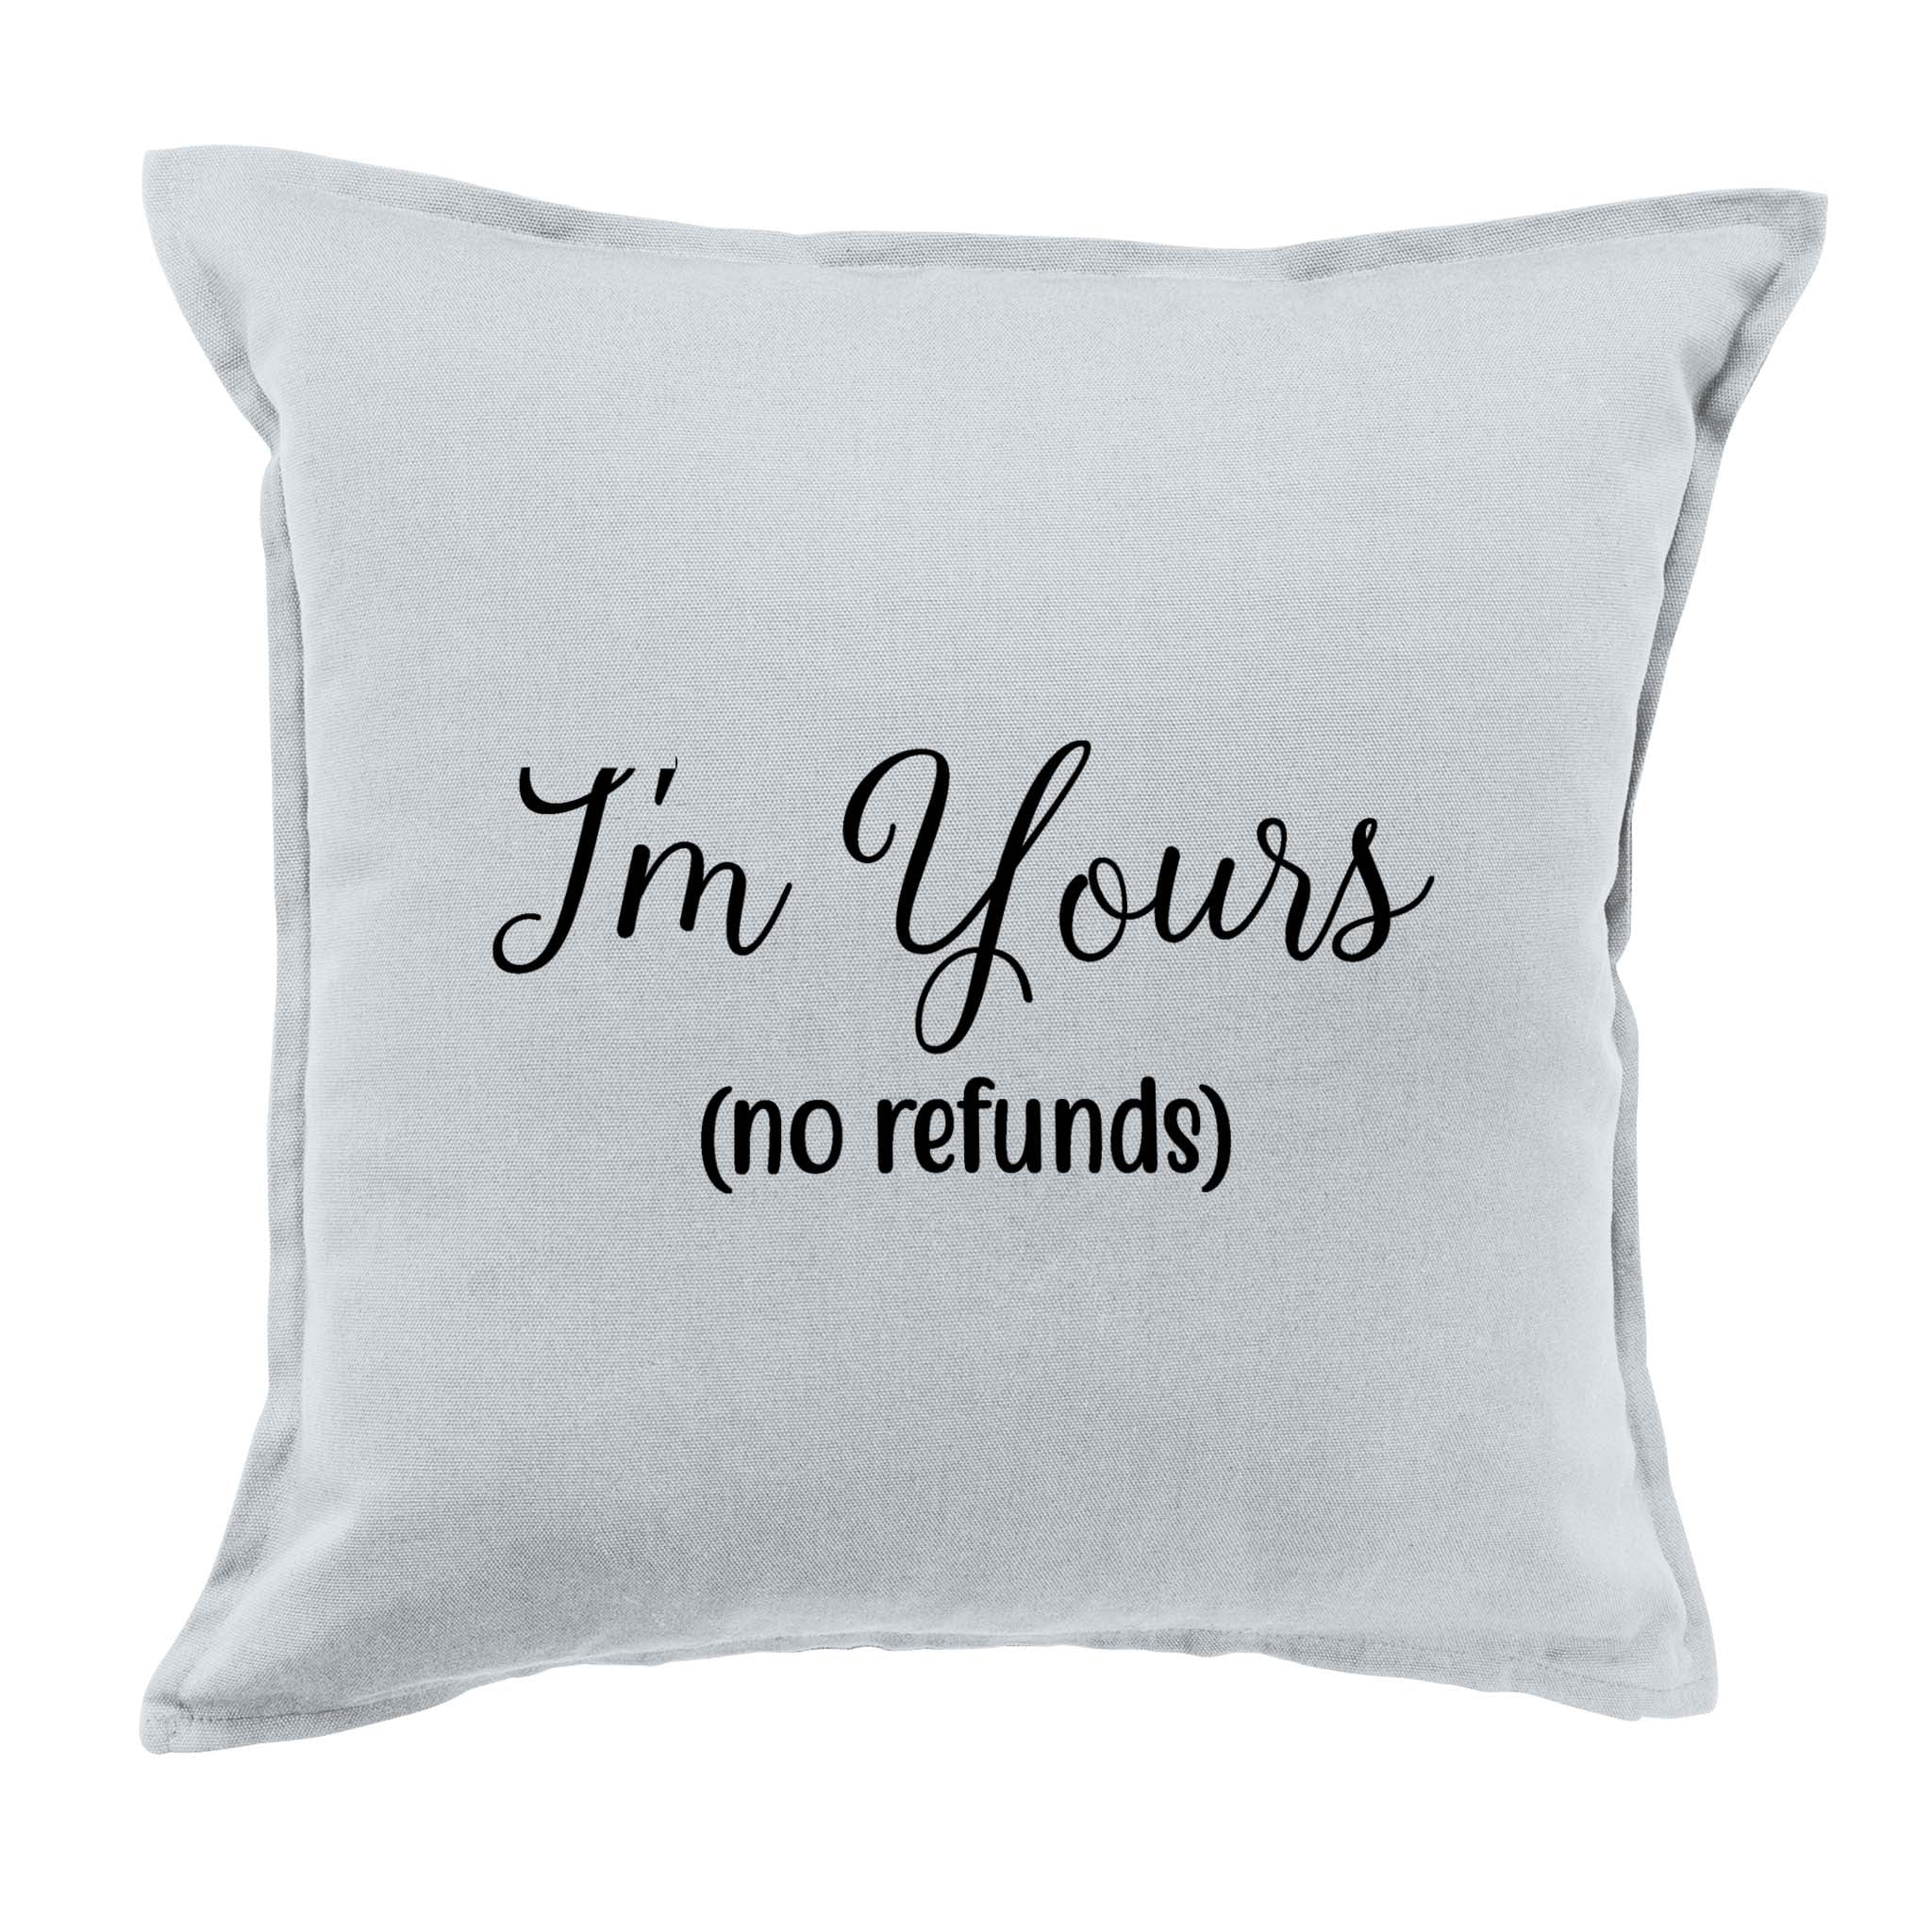 I M Yours Pillow Cushion Cover k807p 